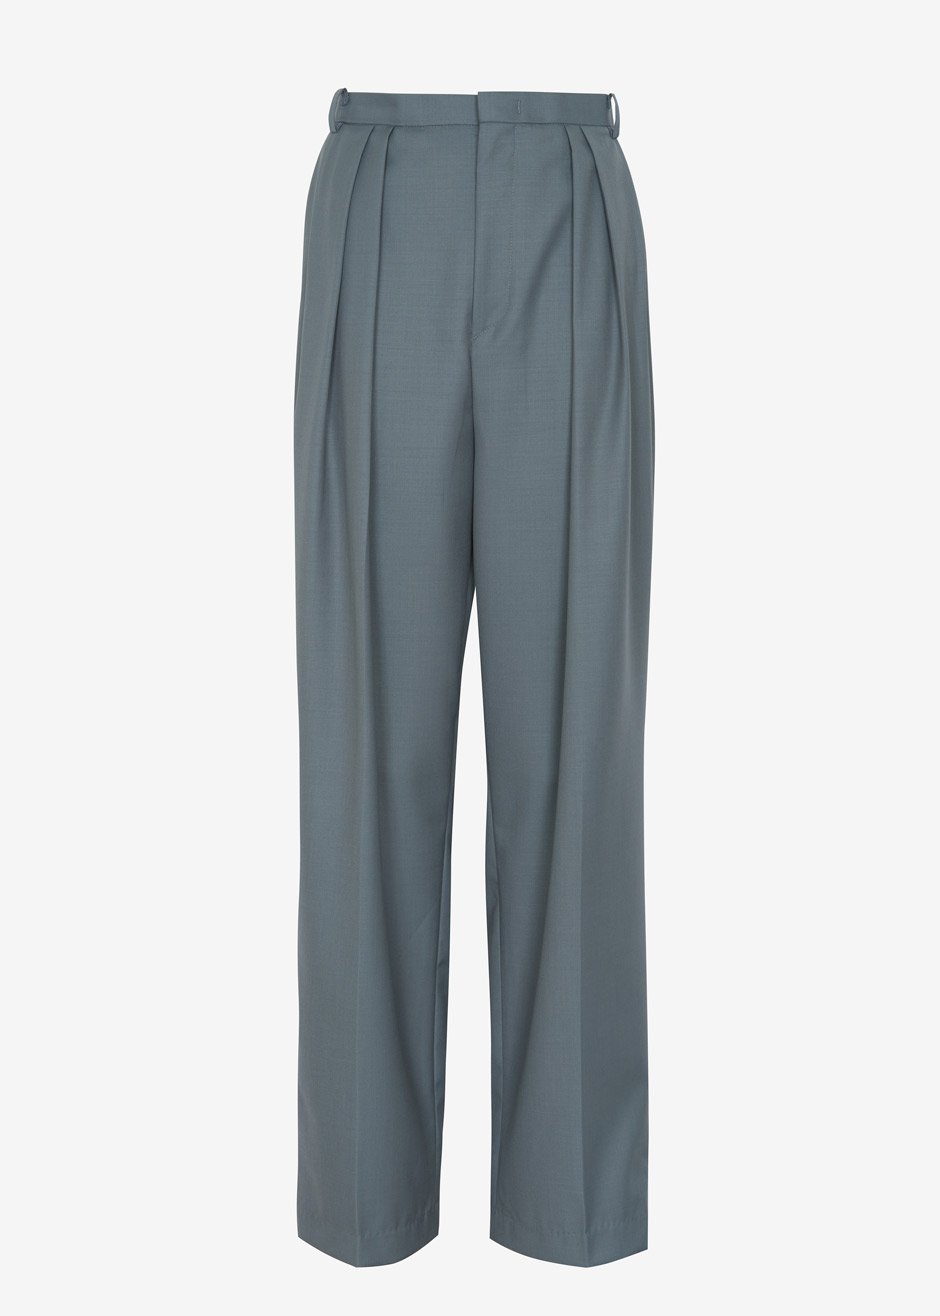 Pleat Front Loose Fit Trousers in Gunmetal – The Frankie Shop